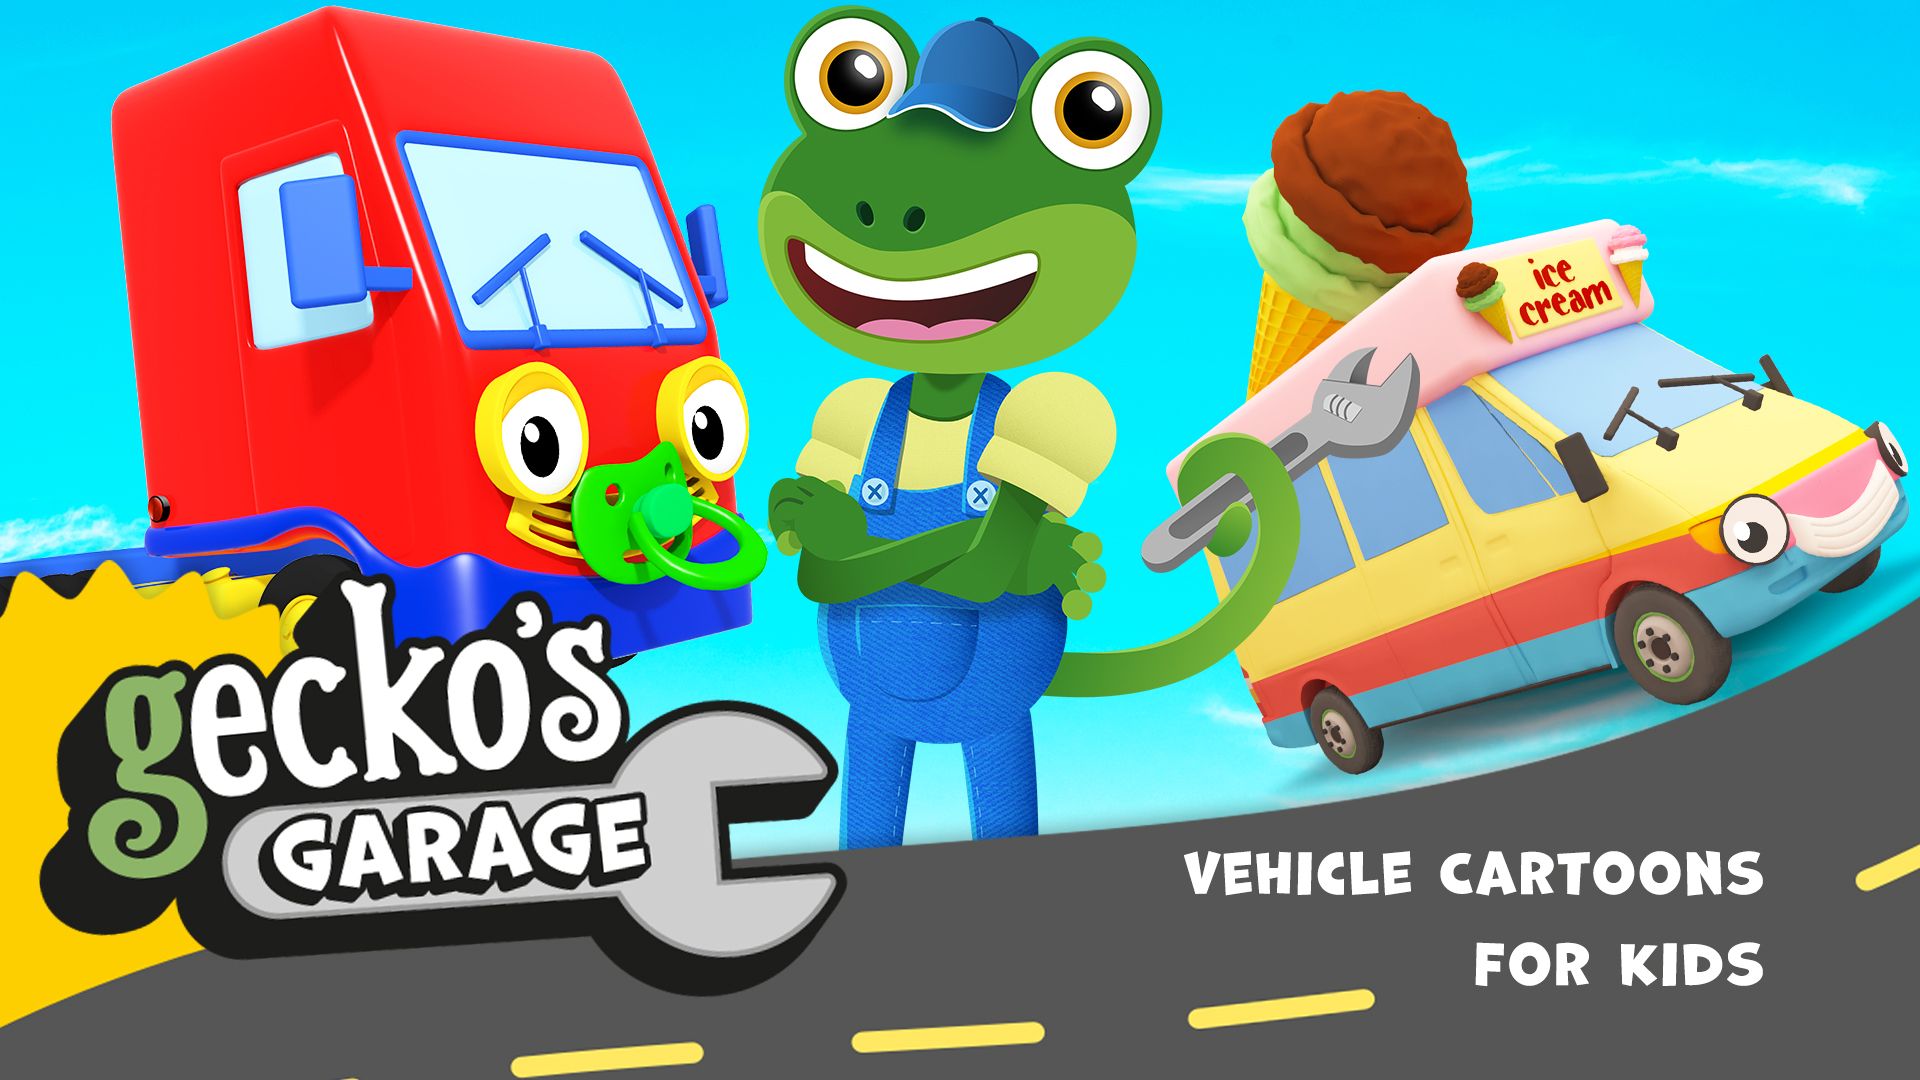 Gecko's Garage Vehicles - Cars Cartoon for Kids Season 4: Where To Watch  Every Episode | Reelgood